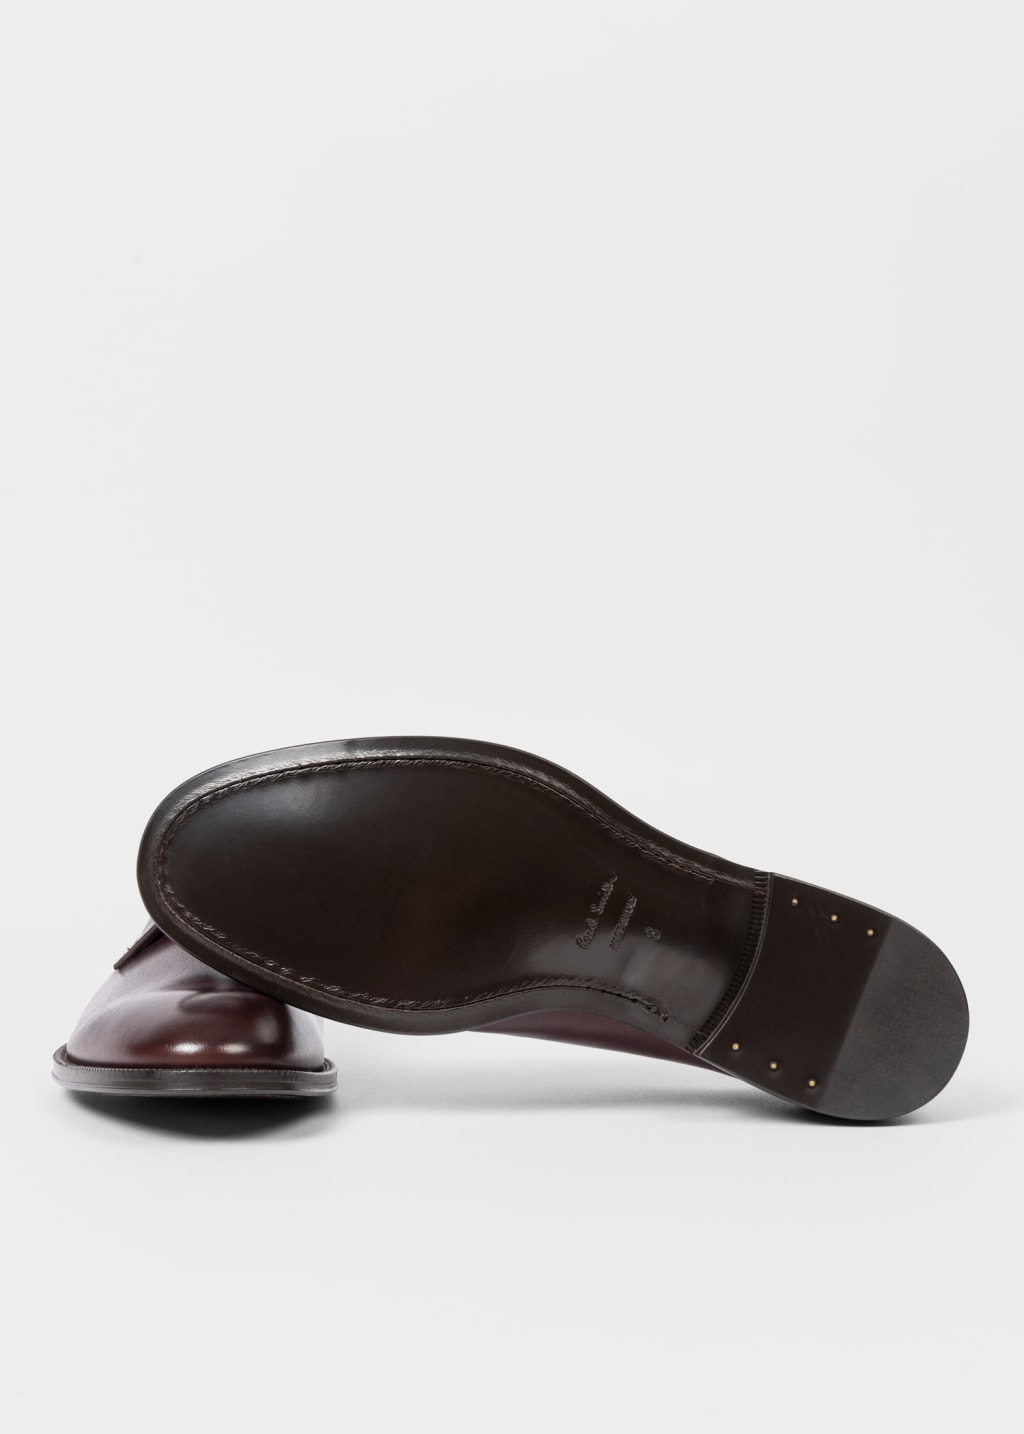 Detail View - Damson 'Chester' Flexible Travel Shoes Paul Smith